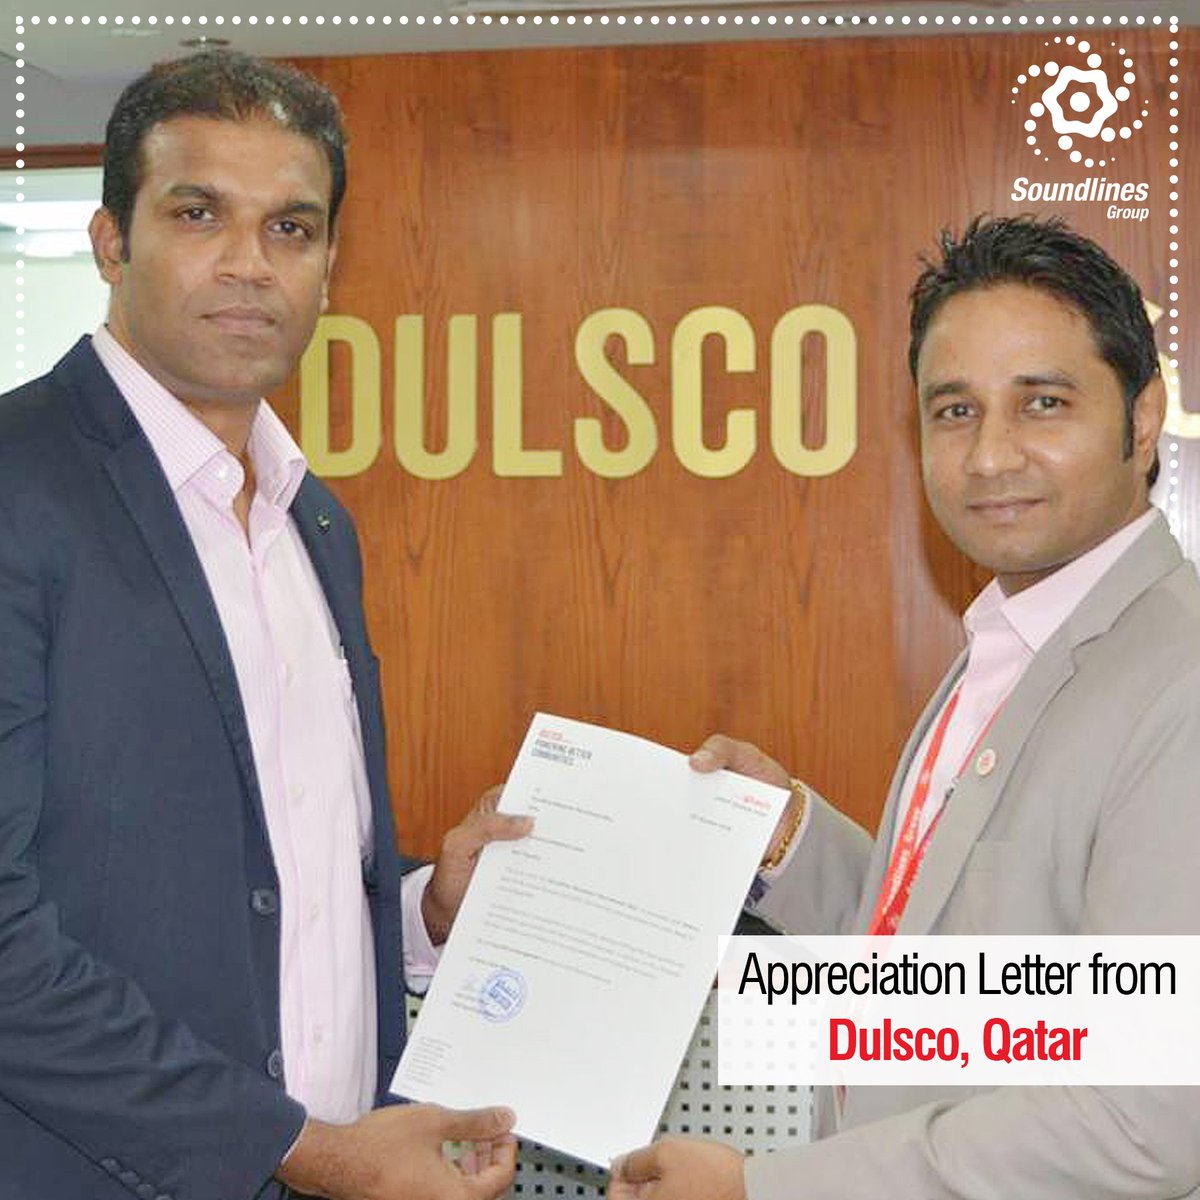 A #moment of #honour!
We, at #SoundlinesGroup, are #proud to receive a letter of #appreciation from #Dulsco, one of the reputed names across #MiddleEast for their #humanresource #deployment #services #LetterOfAppreciation #MomentOfHonour #HR #OverseasRecruitment #Qatar #Manpower